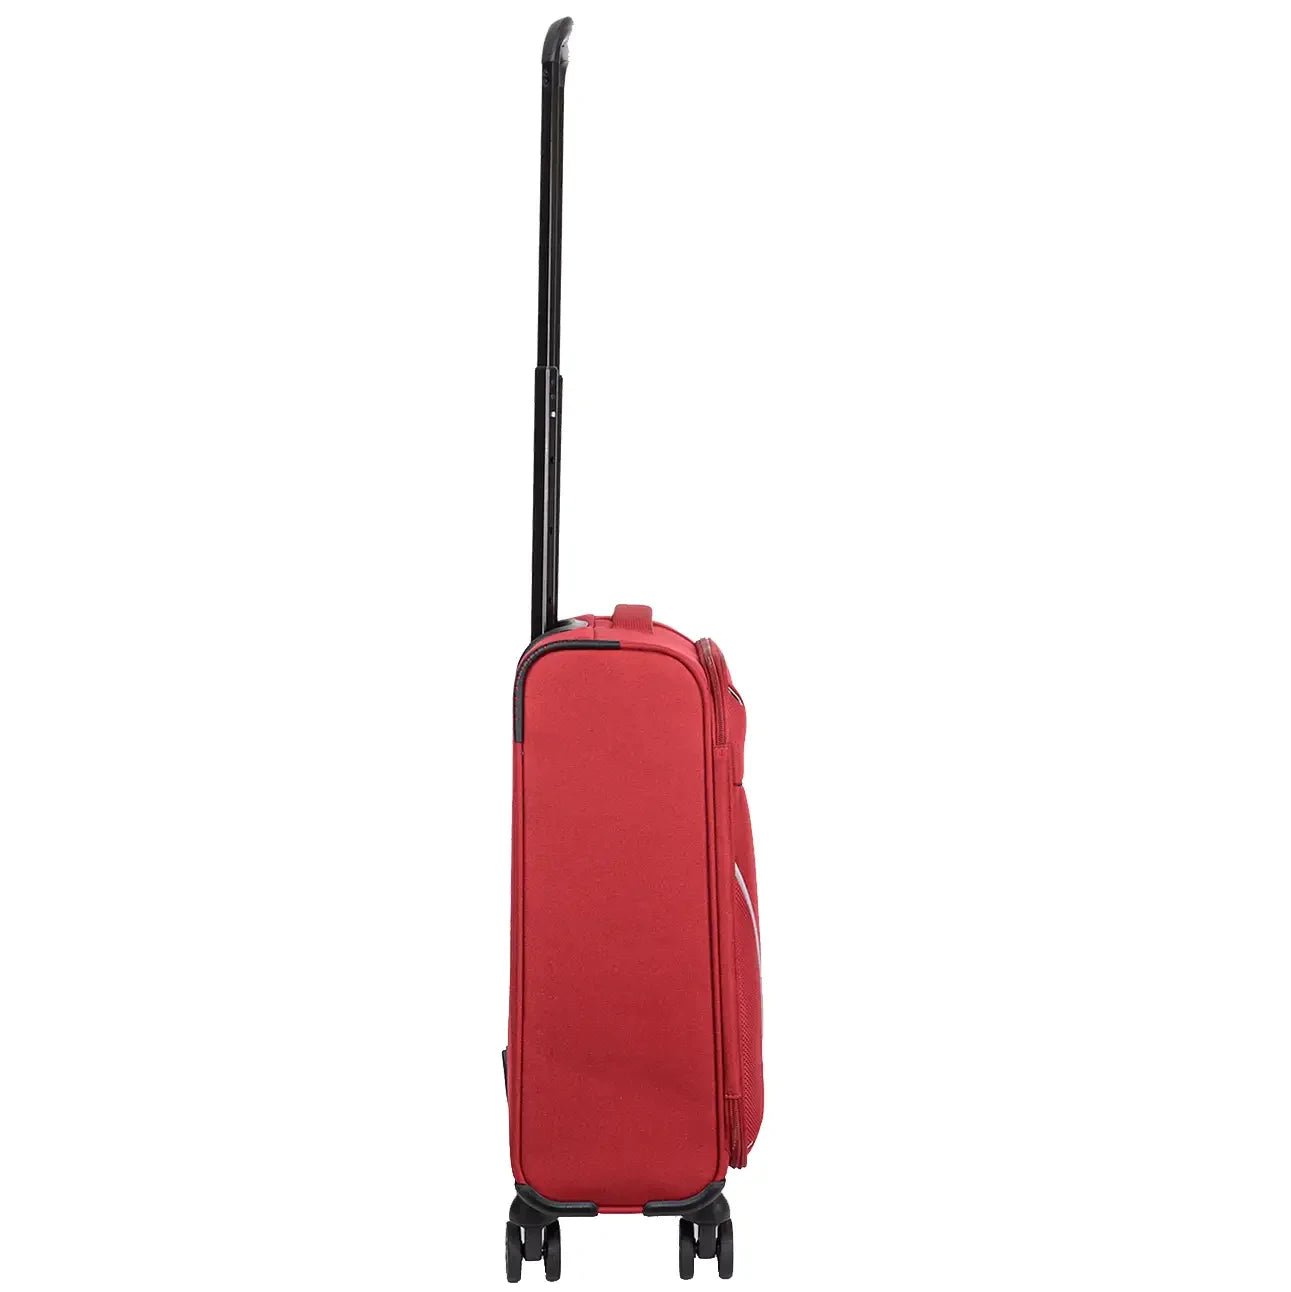 Valise cabine 4 roues Stratic Strong 55 cm - marine